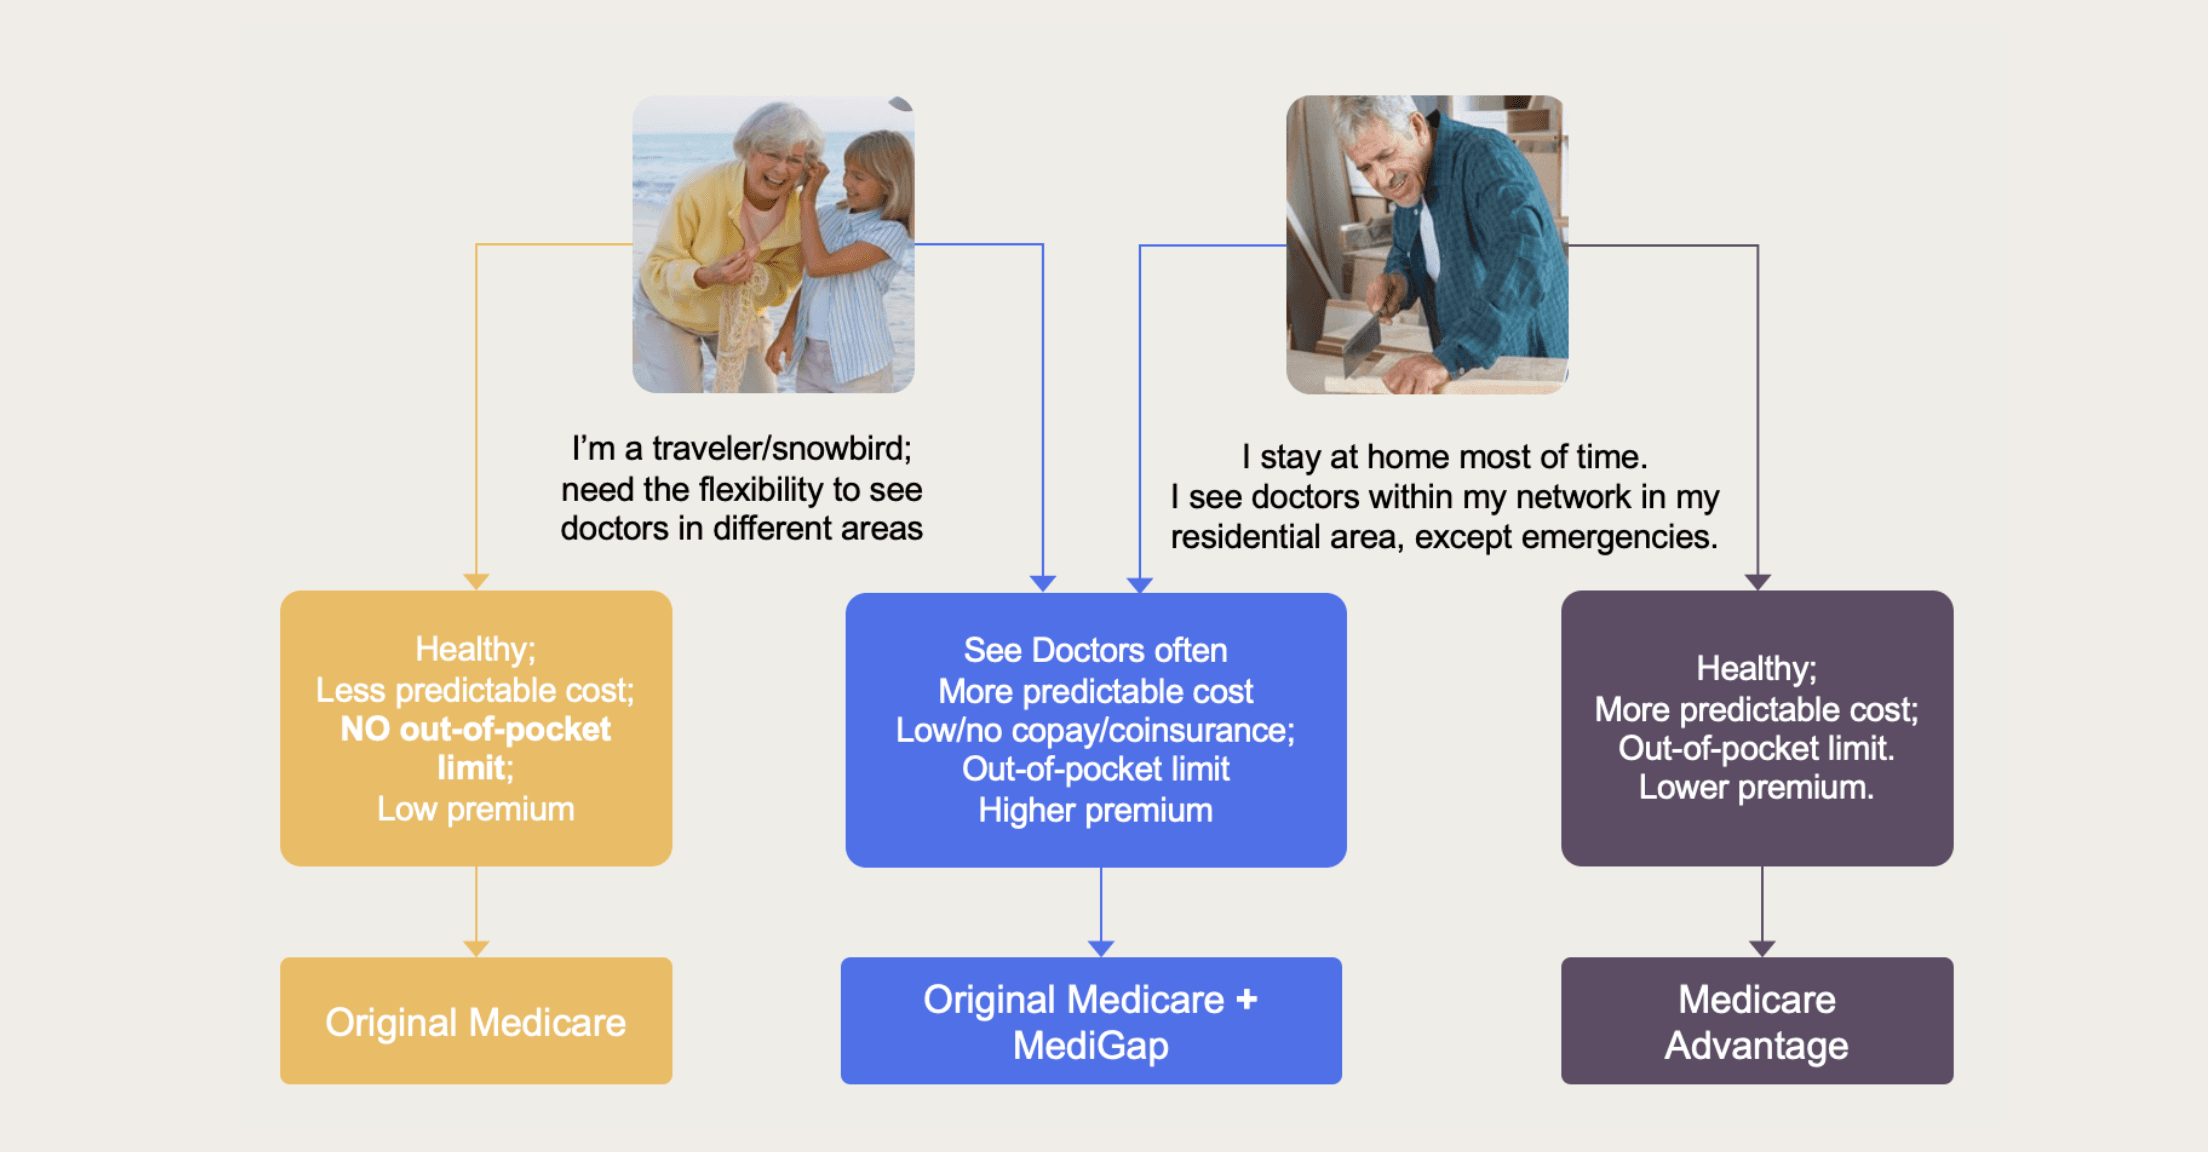 Chart showing different types of Medicare likely needed for different lifestyles